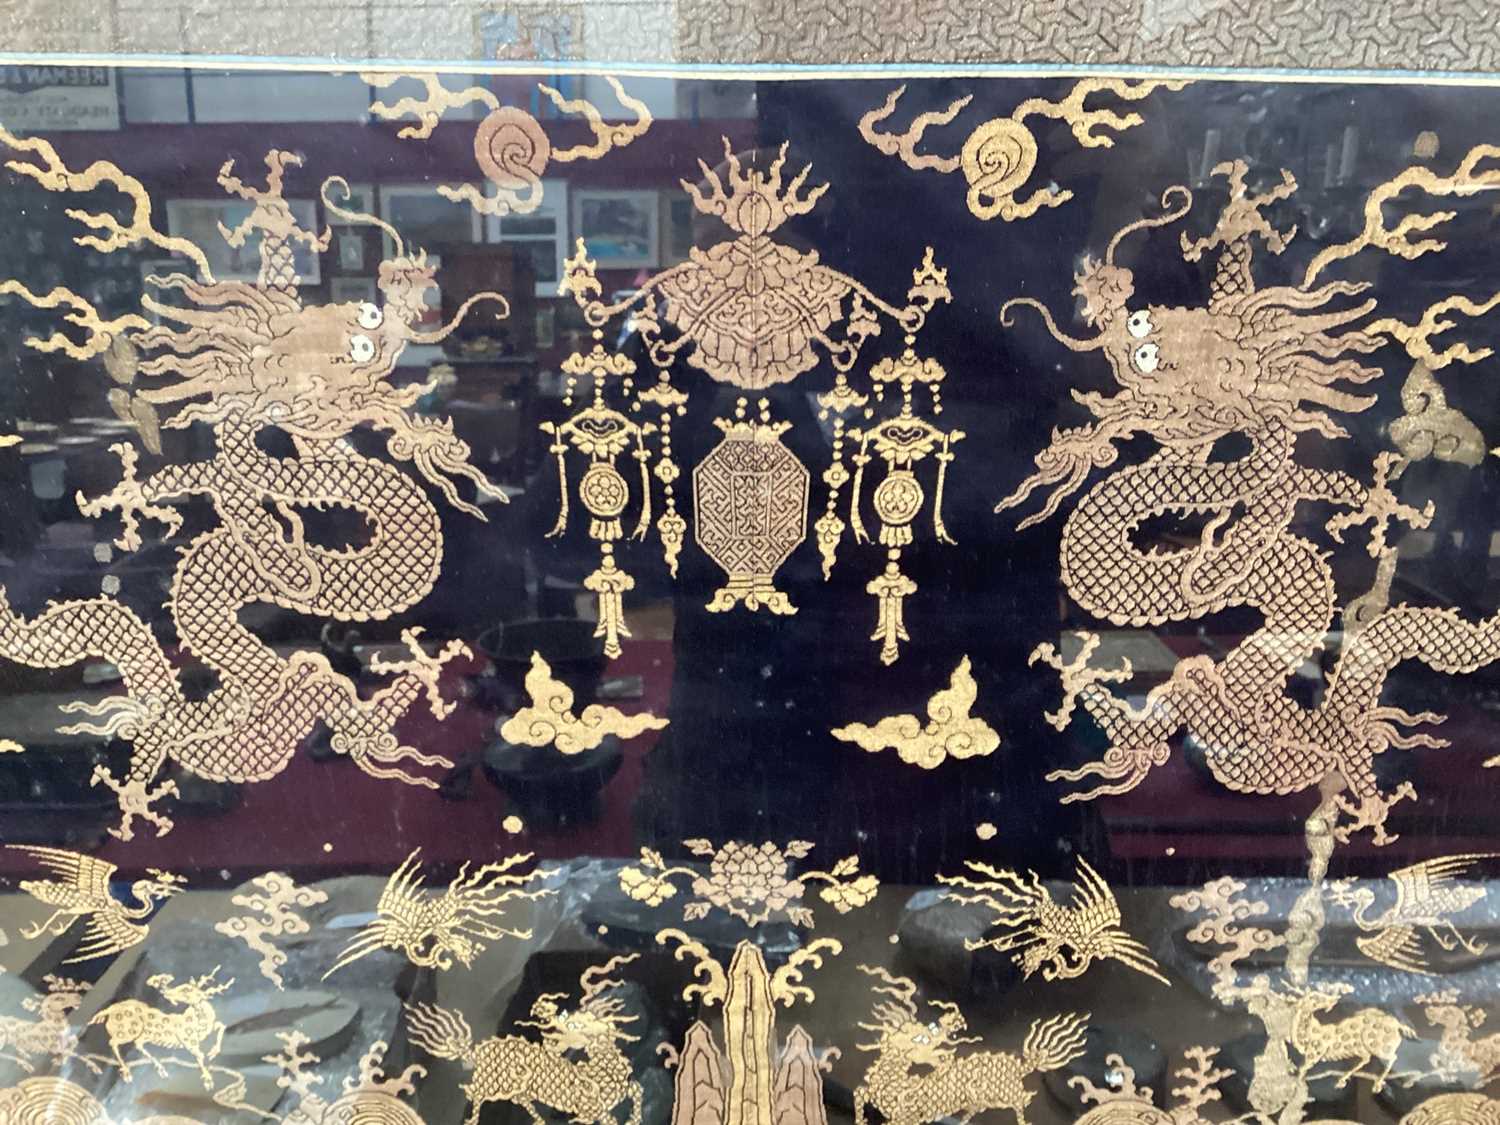 Fine Chinese Qing Dynasty or earlier Imperial gold thread embroidered rank badges - Image 7 of 8